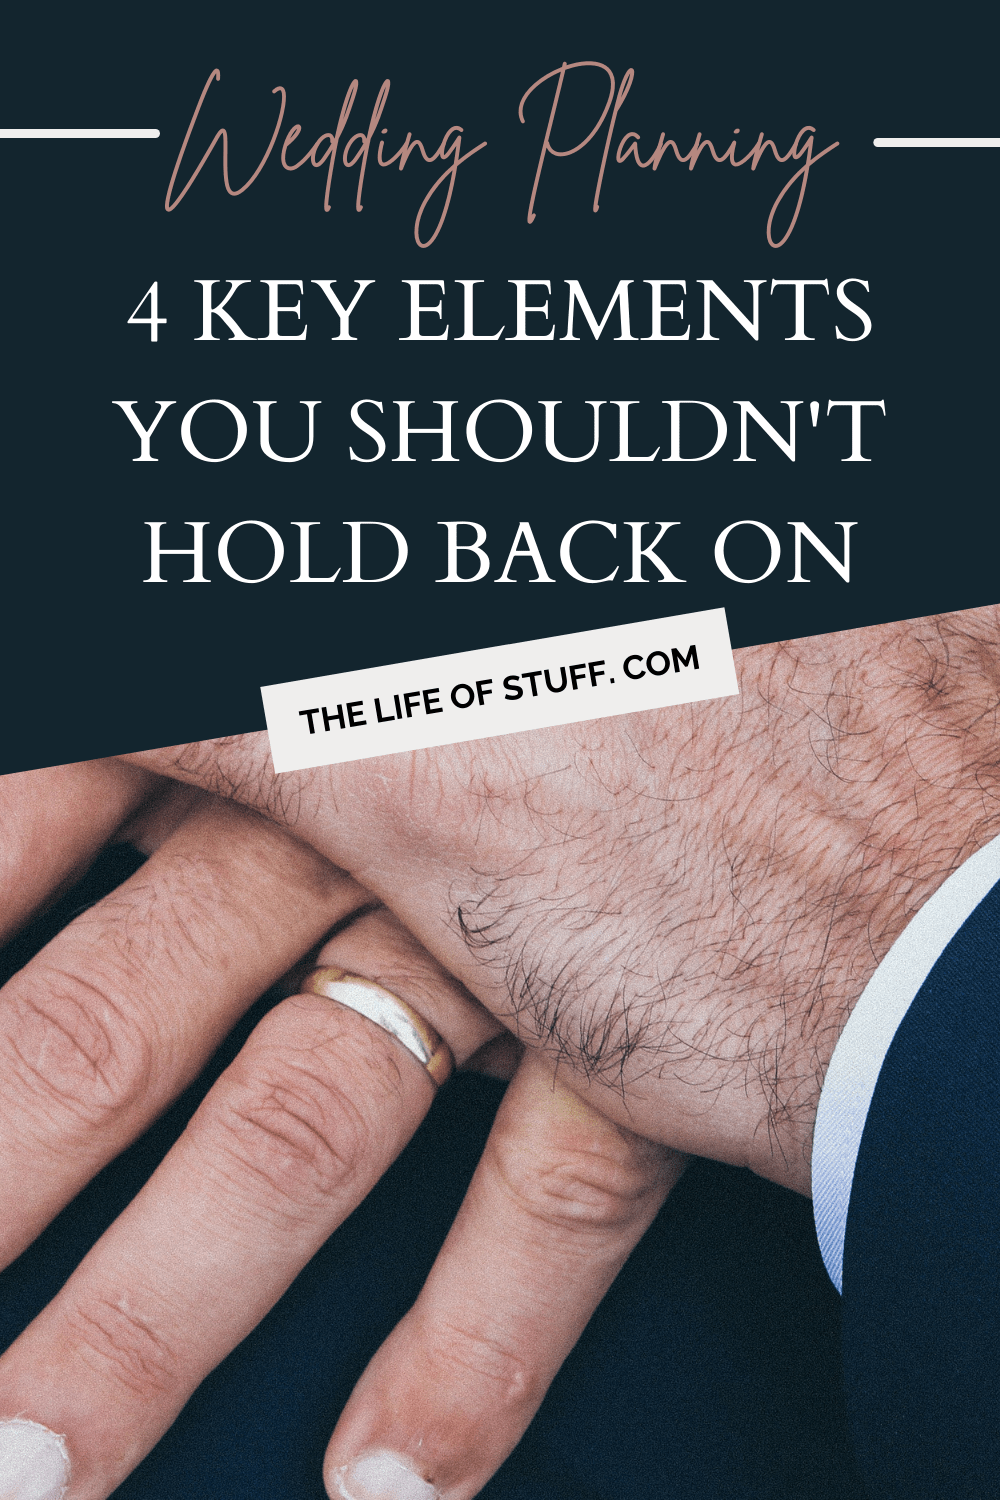 Wedding Planning - 4 Key Elements You Shouldn't Hold Back On - The Life of Stuff